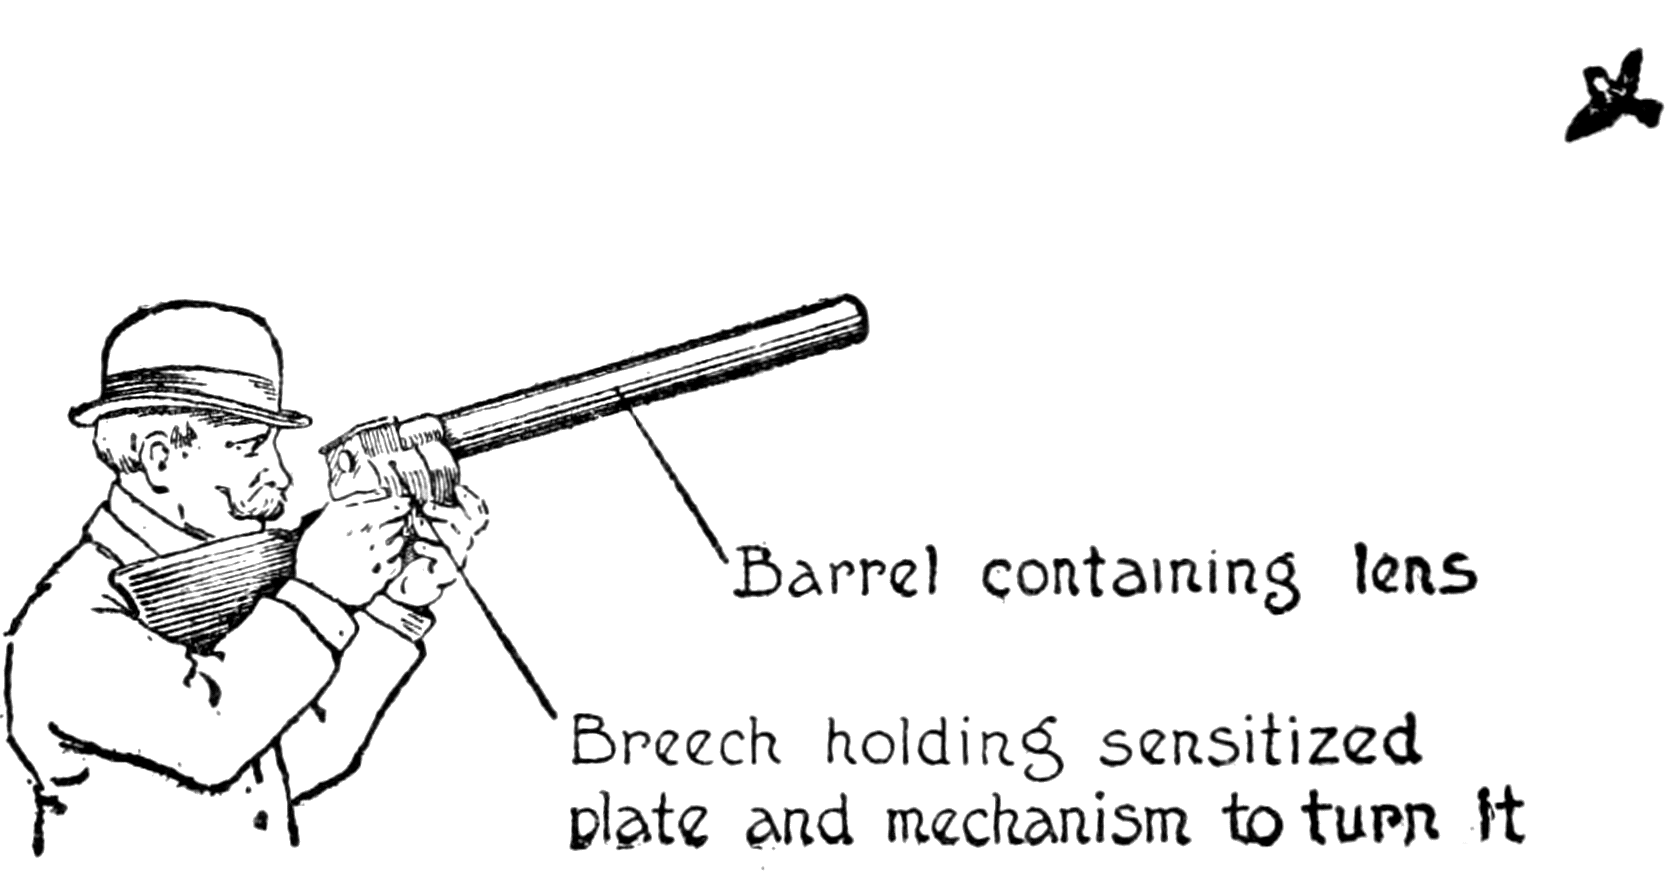 Barrel containing lens; Breech holding sensitized pland and mechanism to turn it